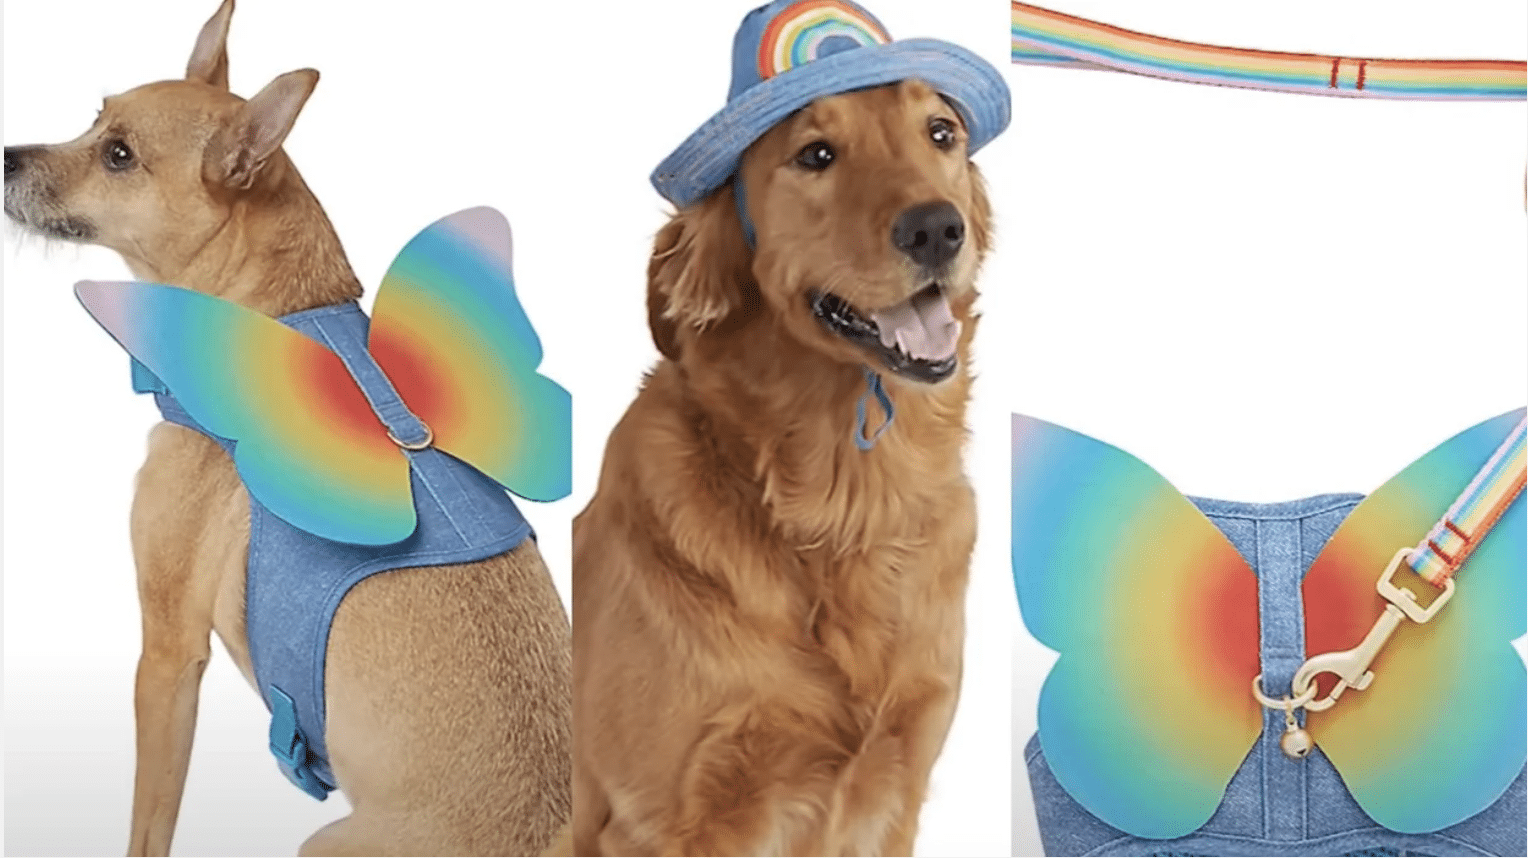 (WATCH) PetSmart unveils LGBTQ-themed products ‘for your gender-fluid fish’ and other gay pets